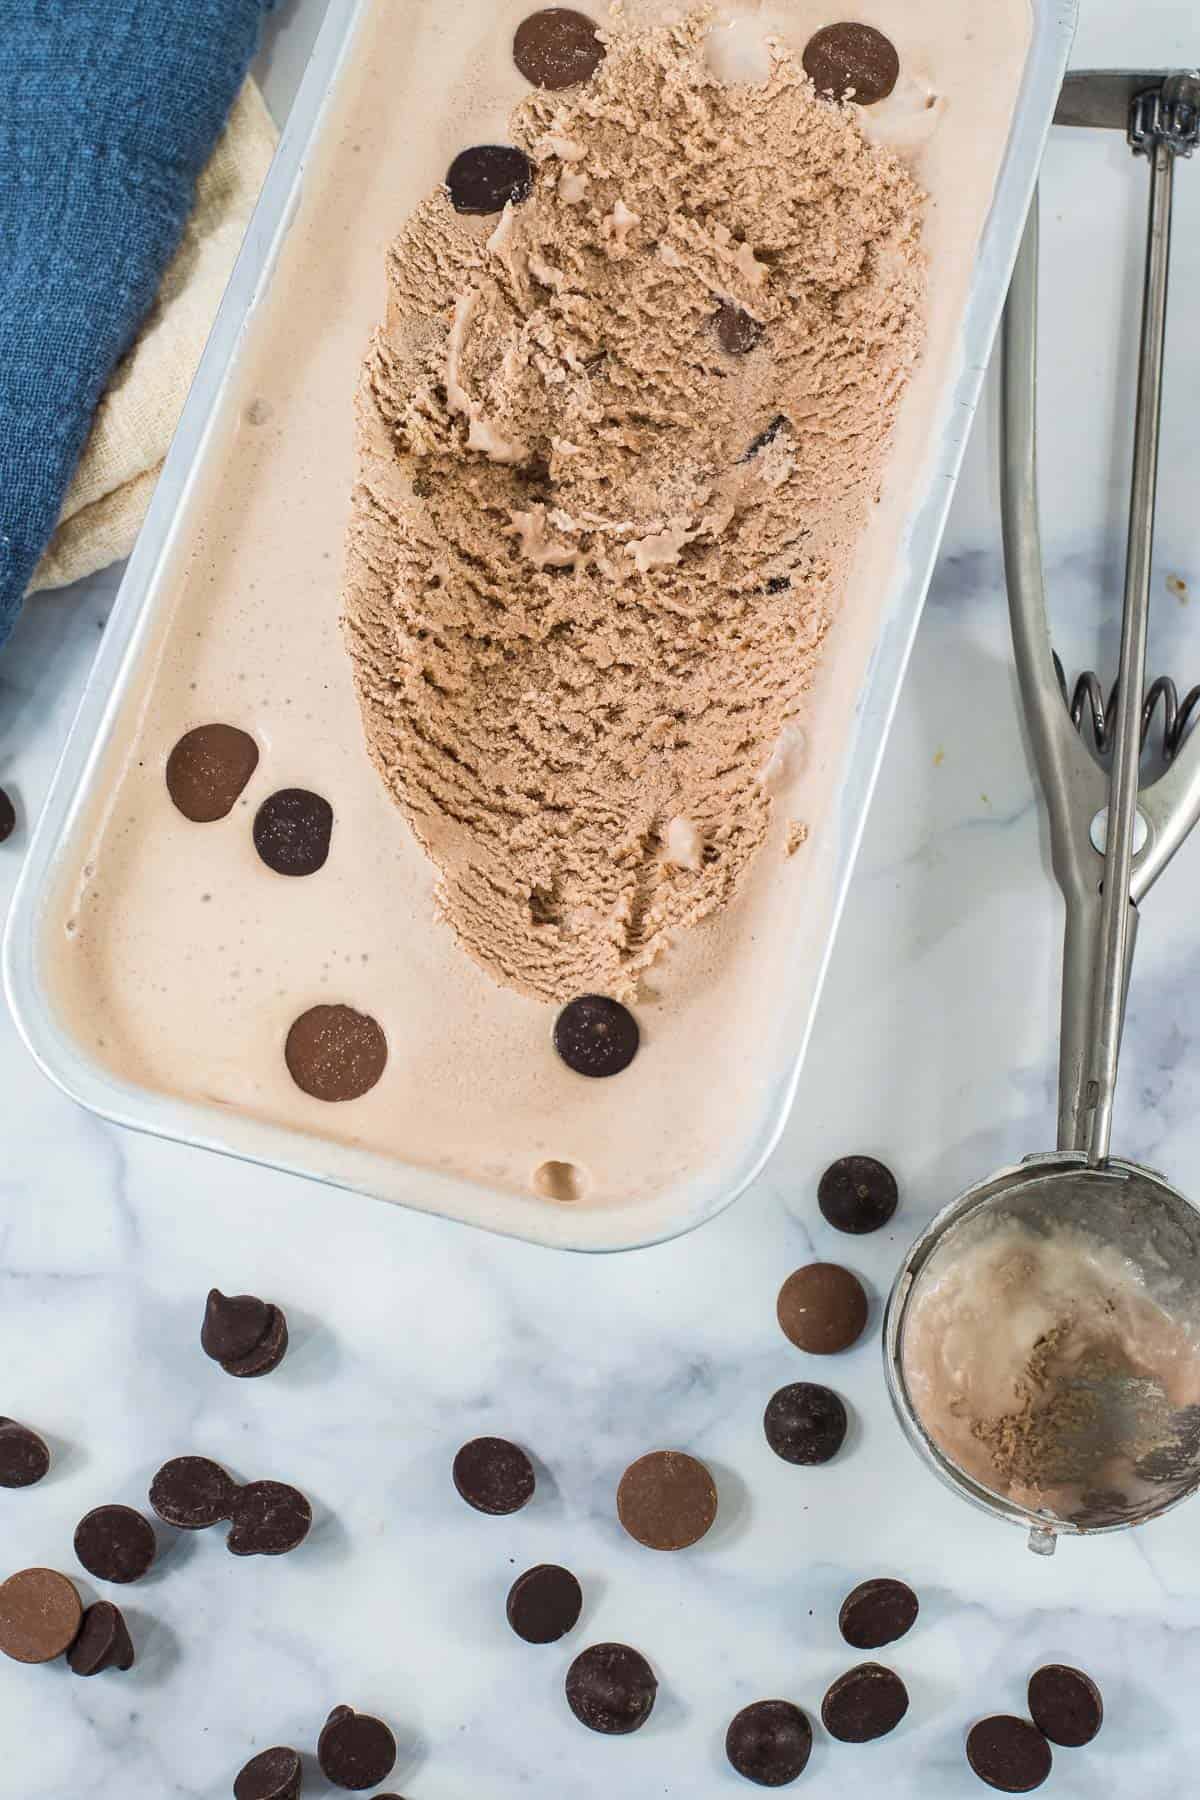 A tray of ice cream with an ice cream scoop at the side